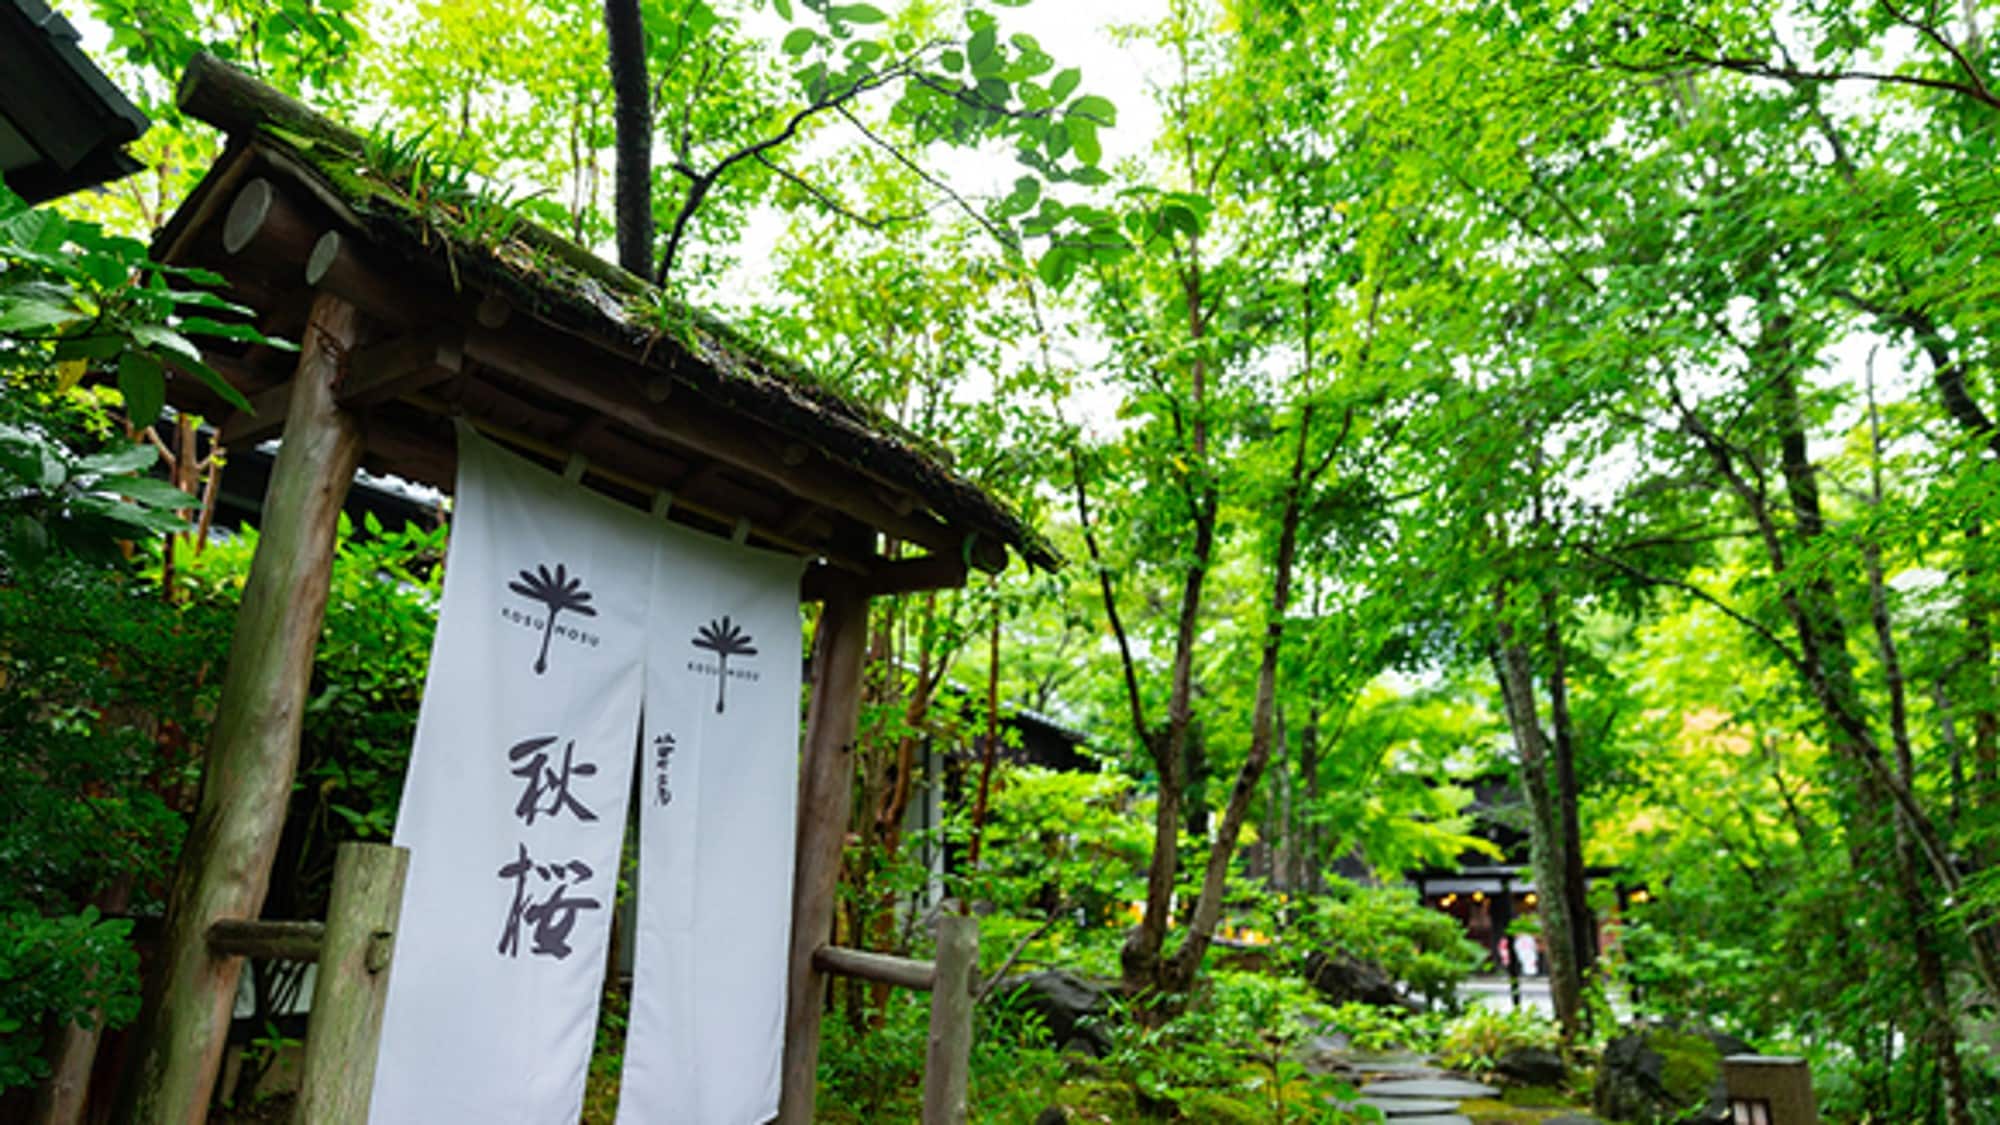 A quiet environment surrounded by vegetation while being conveniently located near a hot spring town.